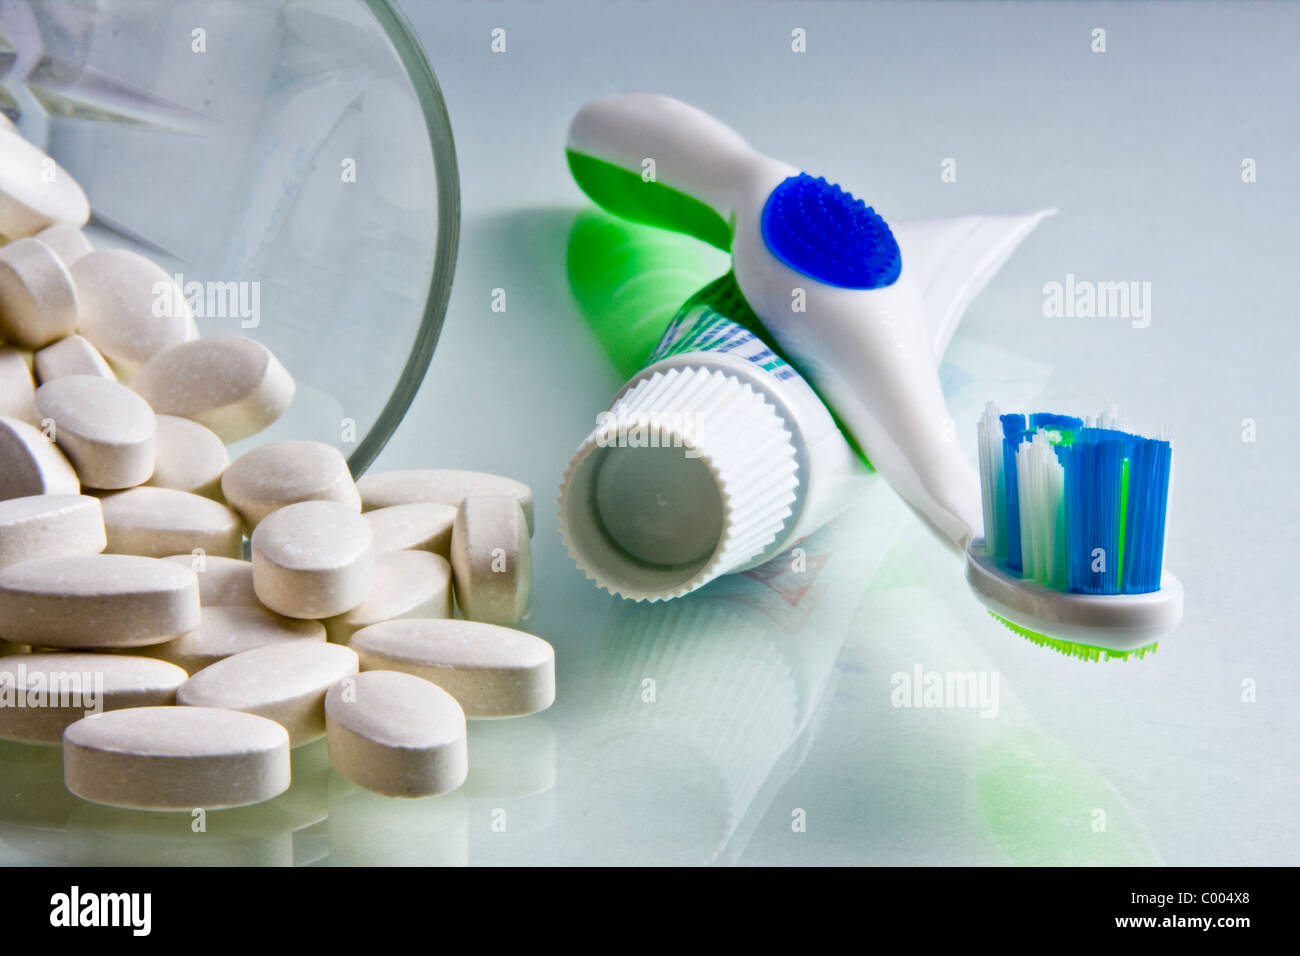 Calcium tablets spilled from a glass with toothpaste and toothbrush beside them Stock Photo